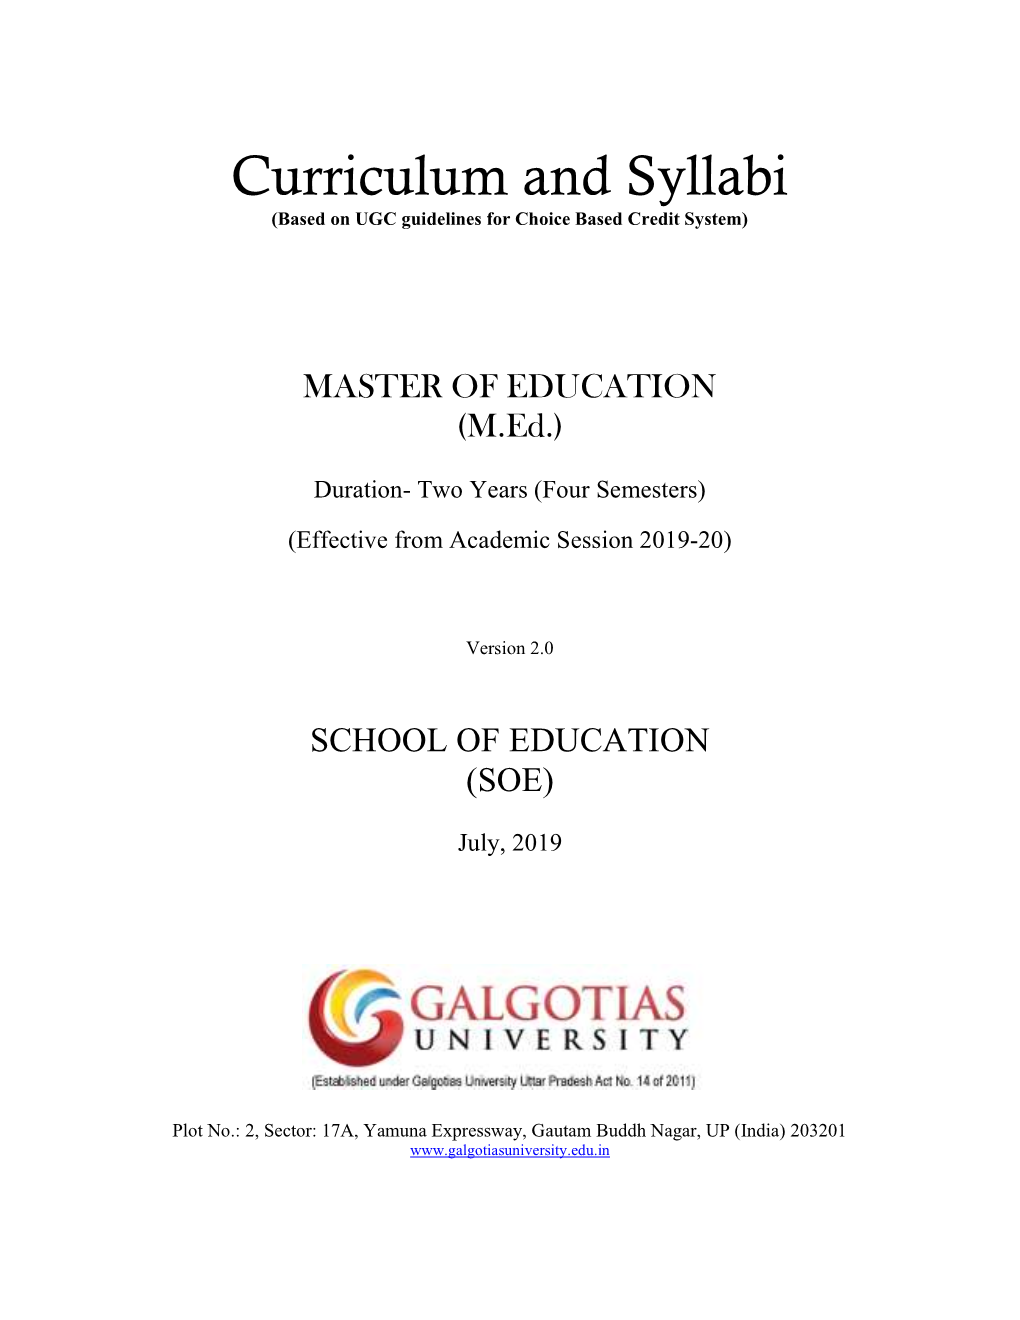 Curriculum and Syllabi (Based on UGC Guidelines for Choice Based Credit System)